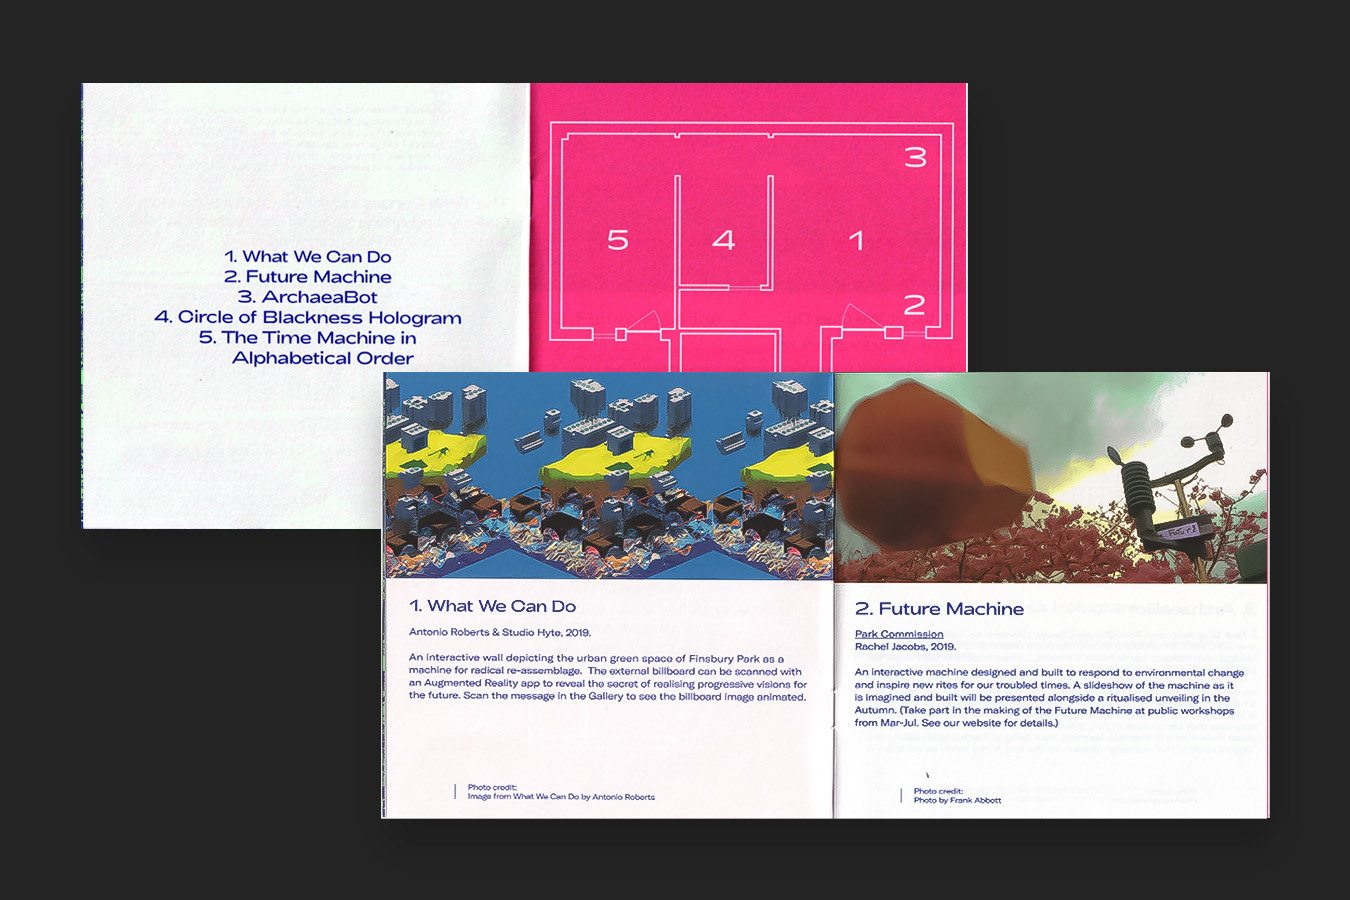 two scans of time portals booklets. The front spread has images at the top of both pages with blue text underneath, the left photo shows a sci-fi floating island image, the right shows a weather anemometer in front of a pink blossom tree with a blurred orange 3D shape in the front of the image. The spread in the background has a neon pink map of further field gallery and a contents on the opposite page.